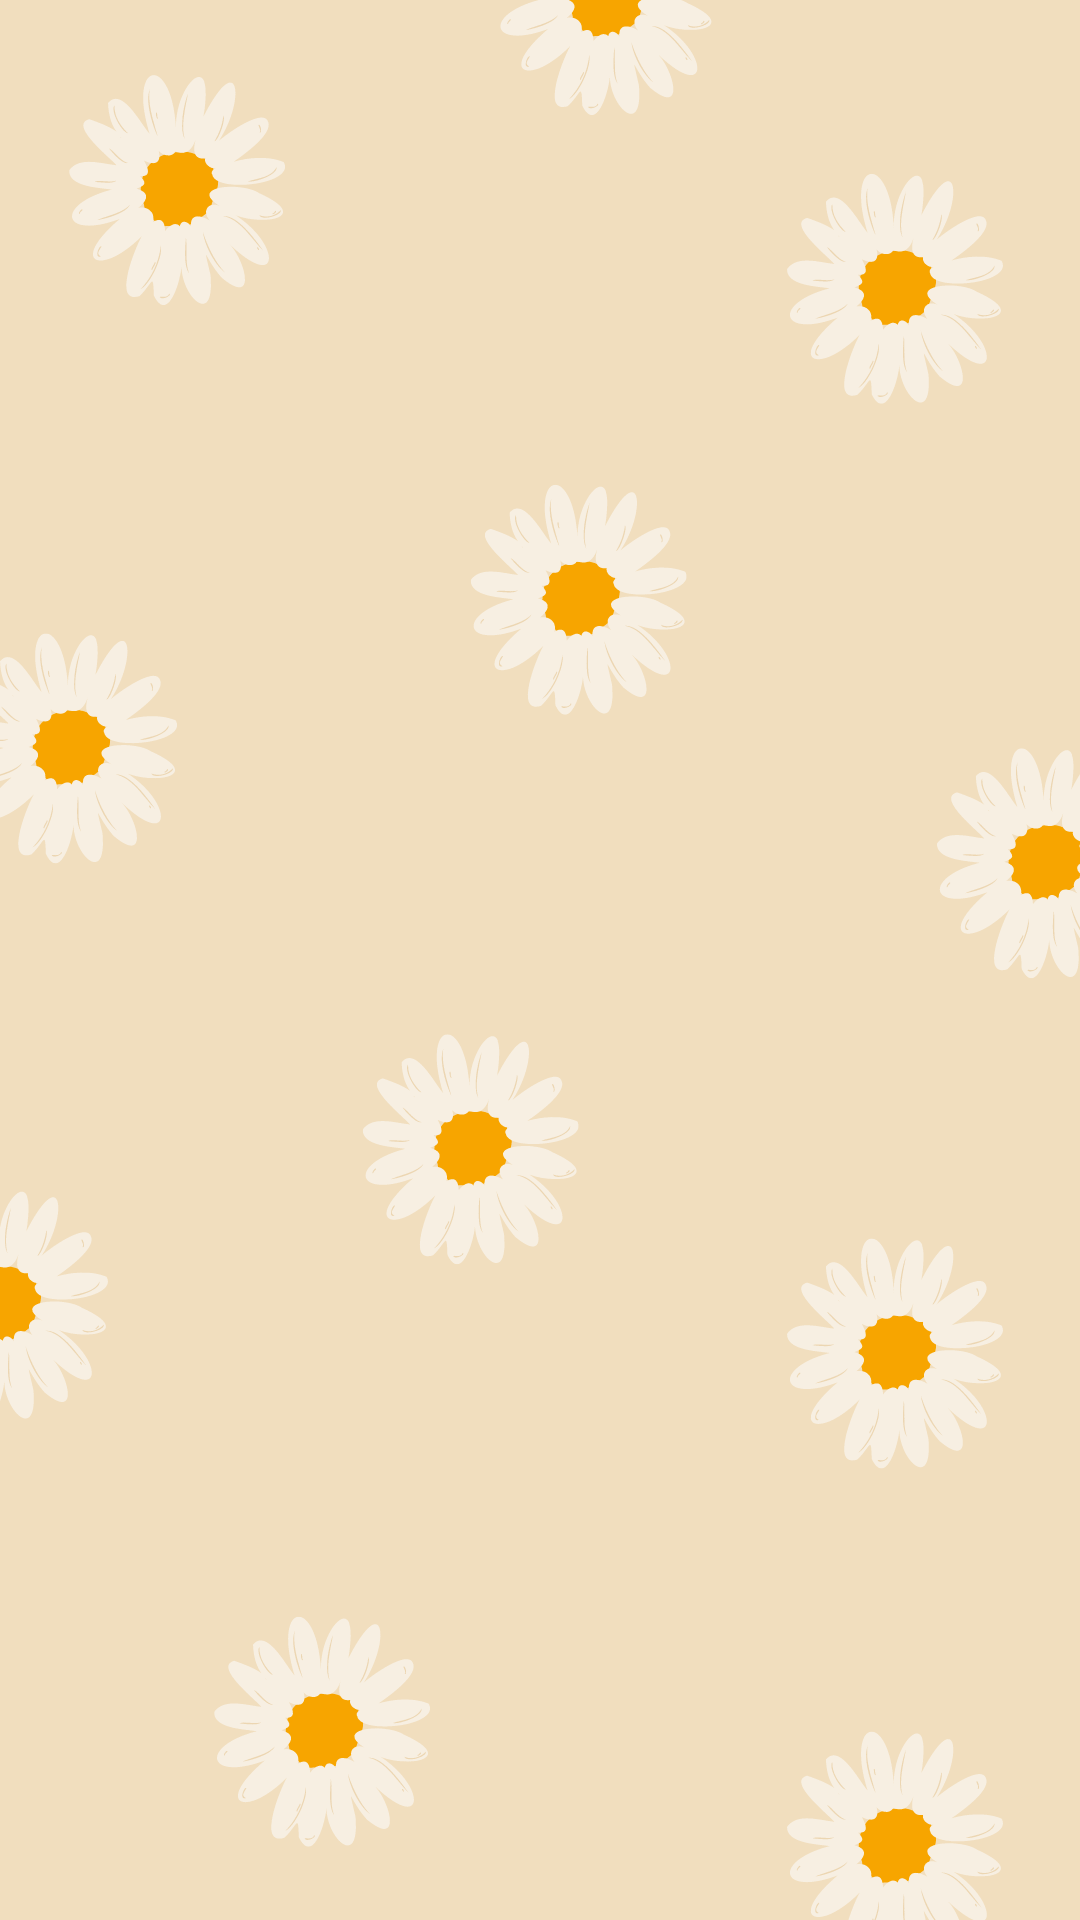 A pattern of daisies on beige background - Cute